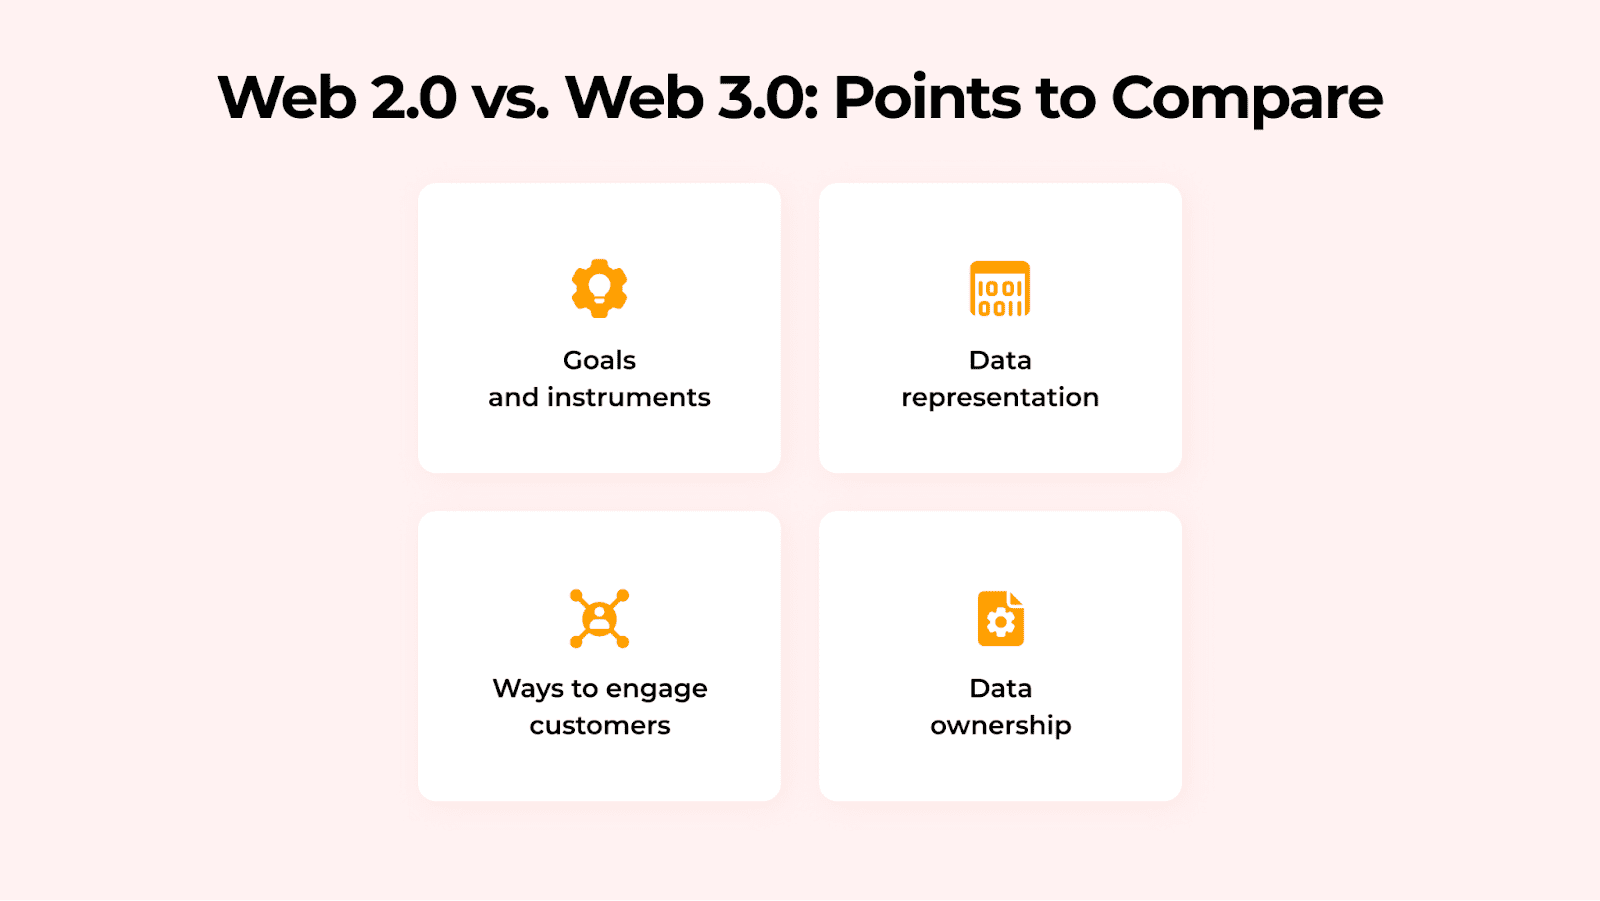 Web 2.0 and Web 3.0 the most common points to compare